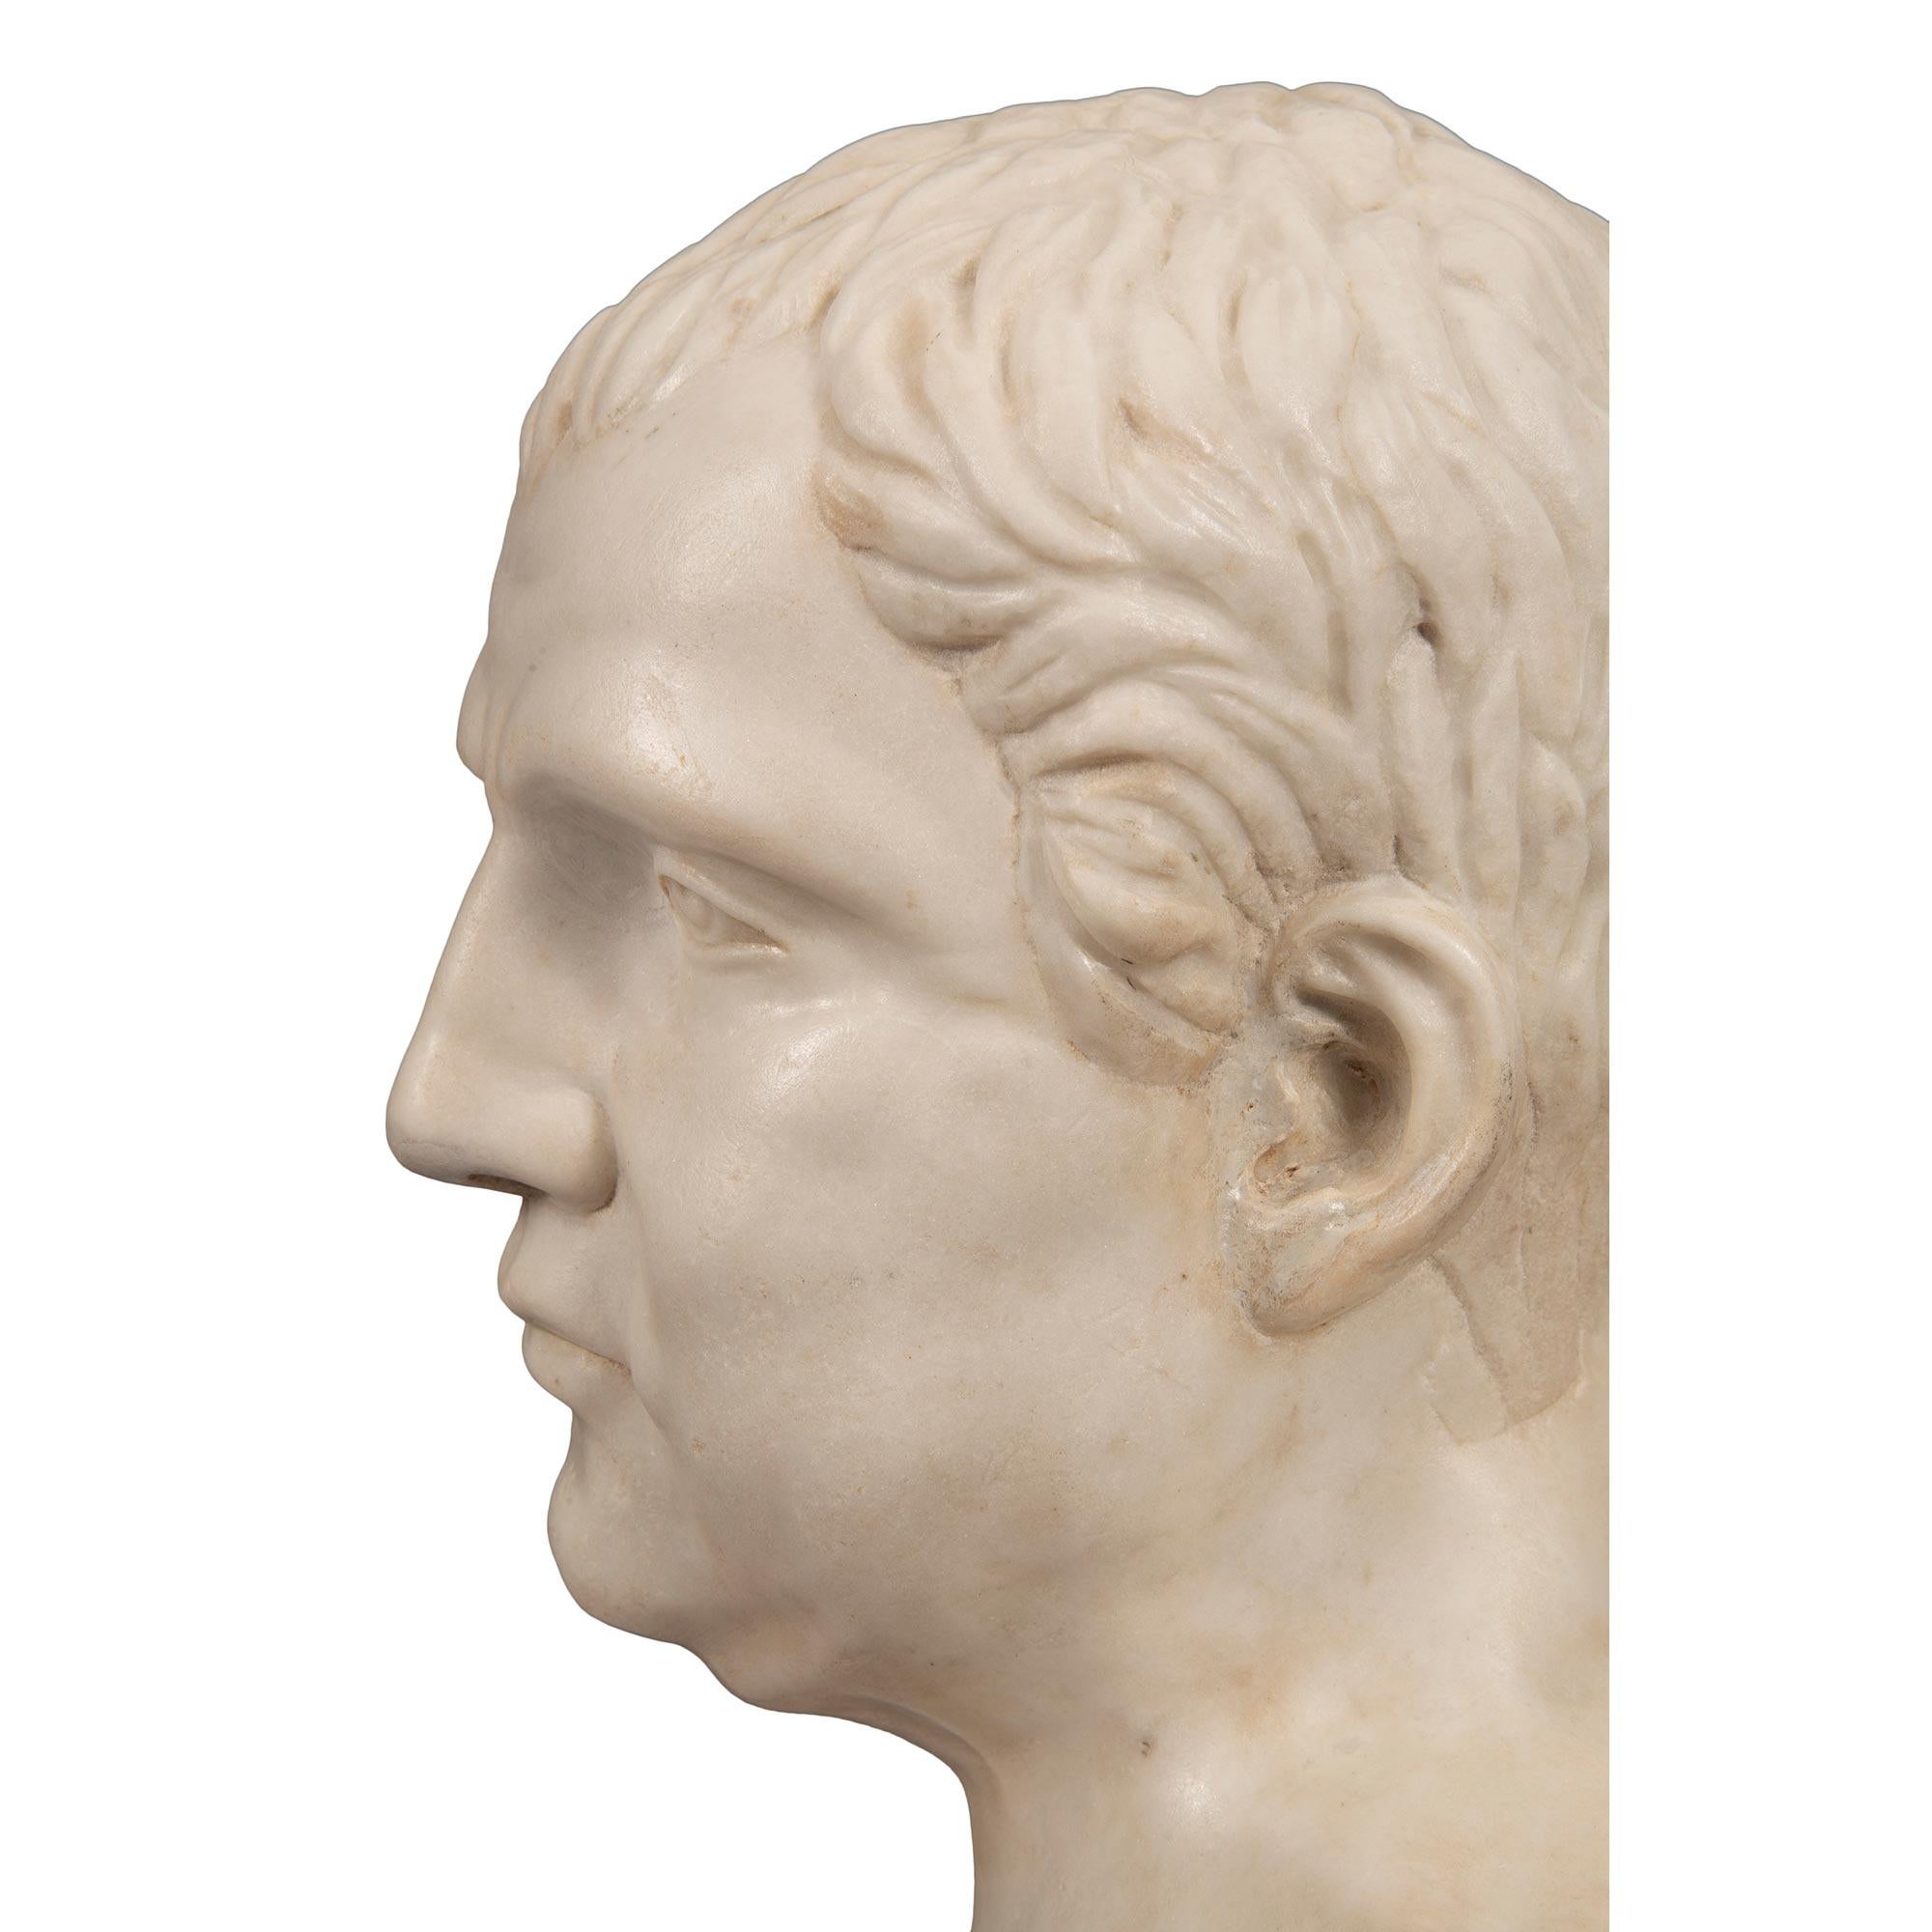 Italian Early 19th Century White Carrara Marble Bust of a Roman Emperor For Sale 4